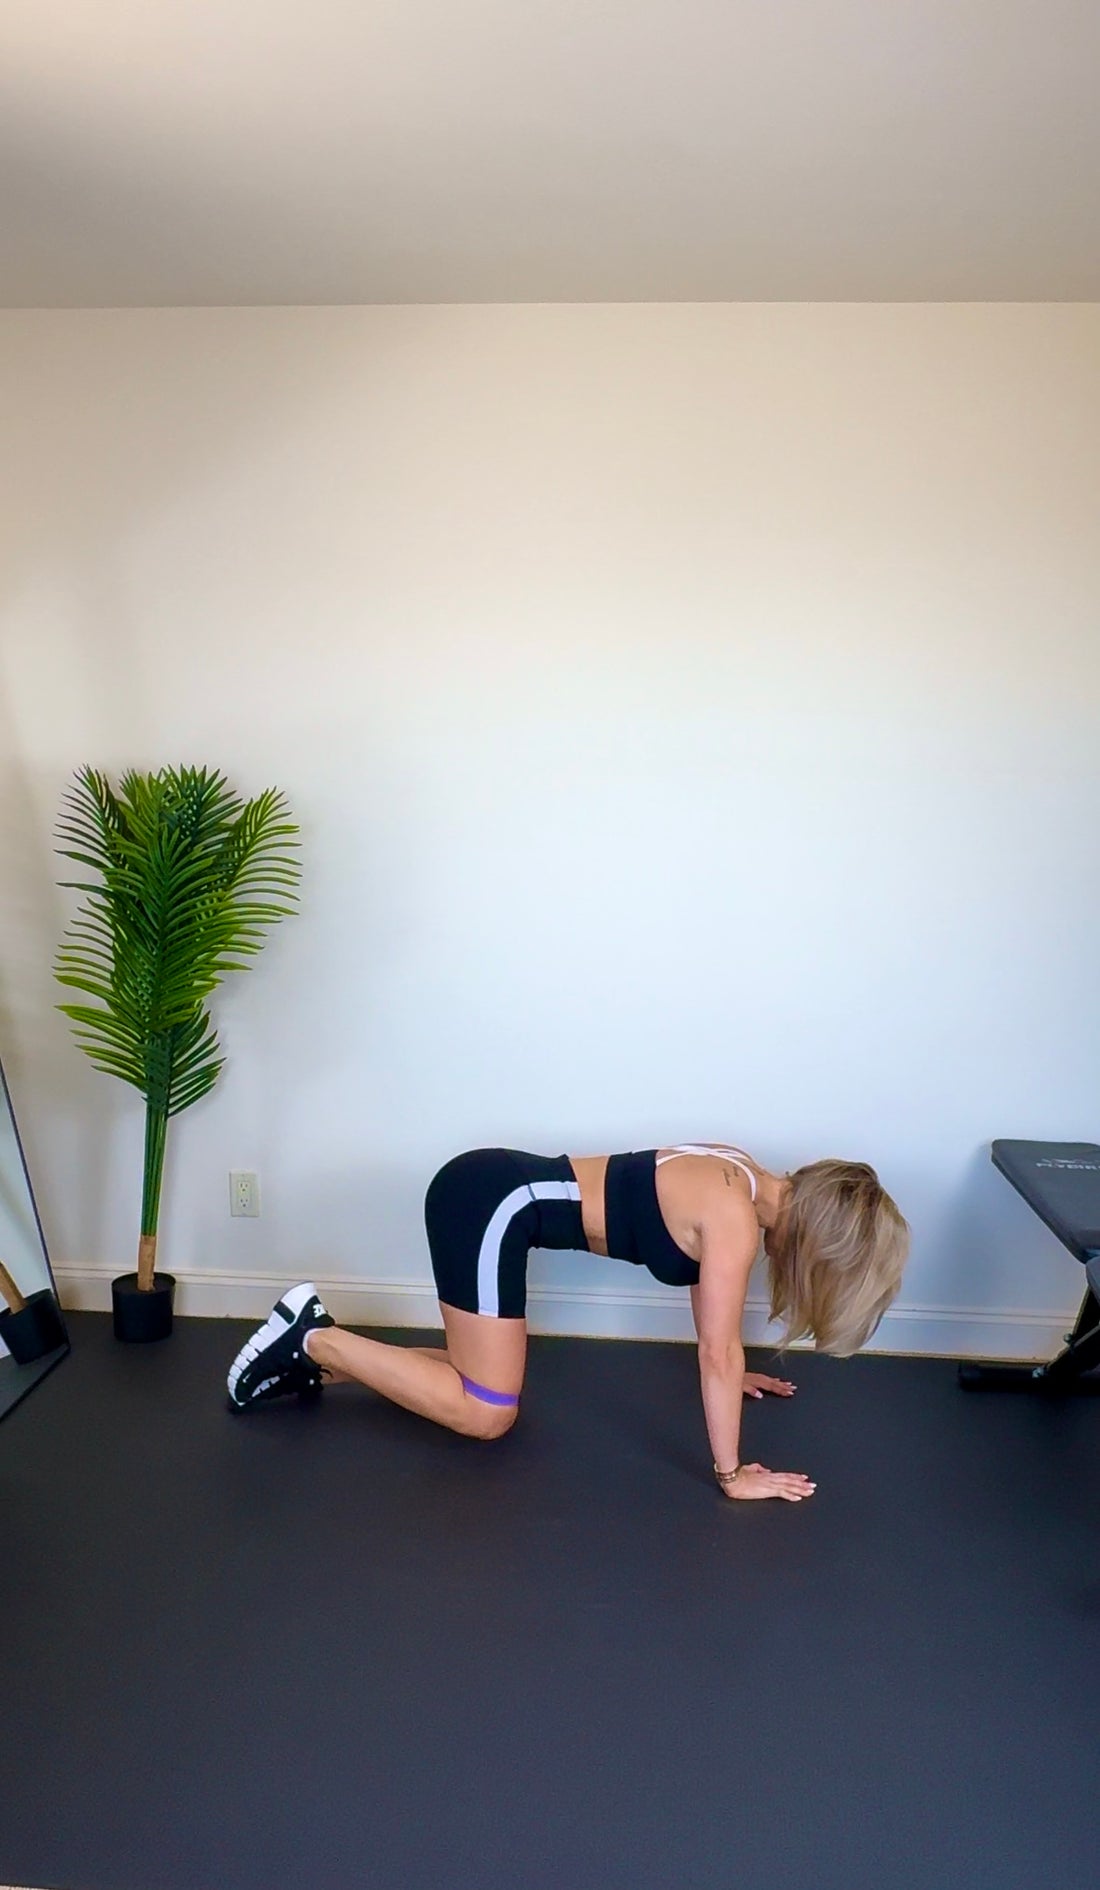 Sculpt Your Legs And Core Right On The Floor! 💪🏻